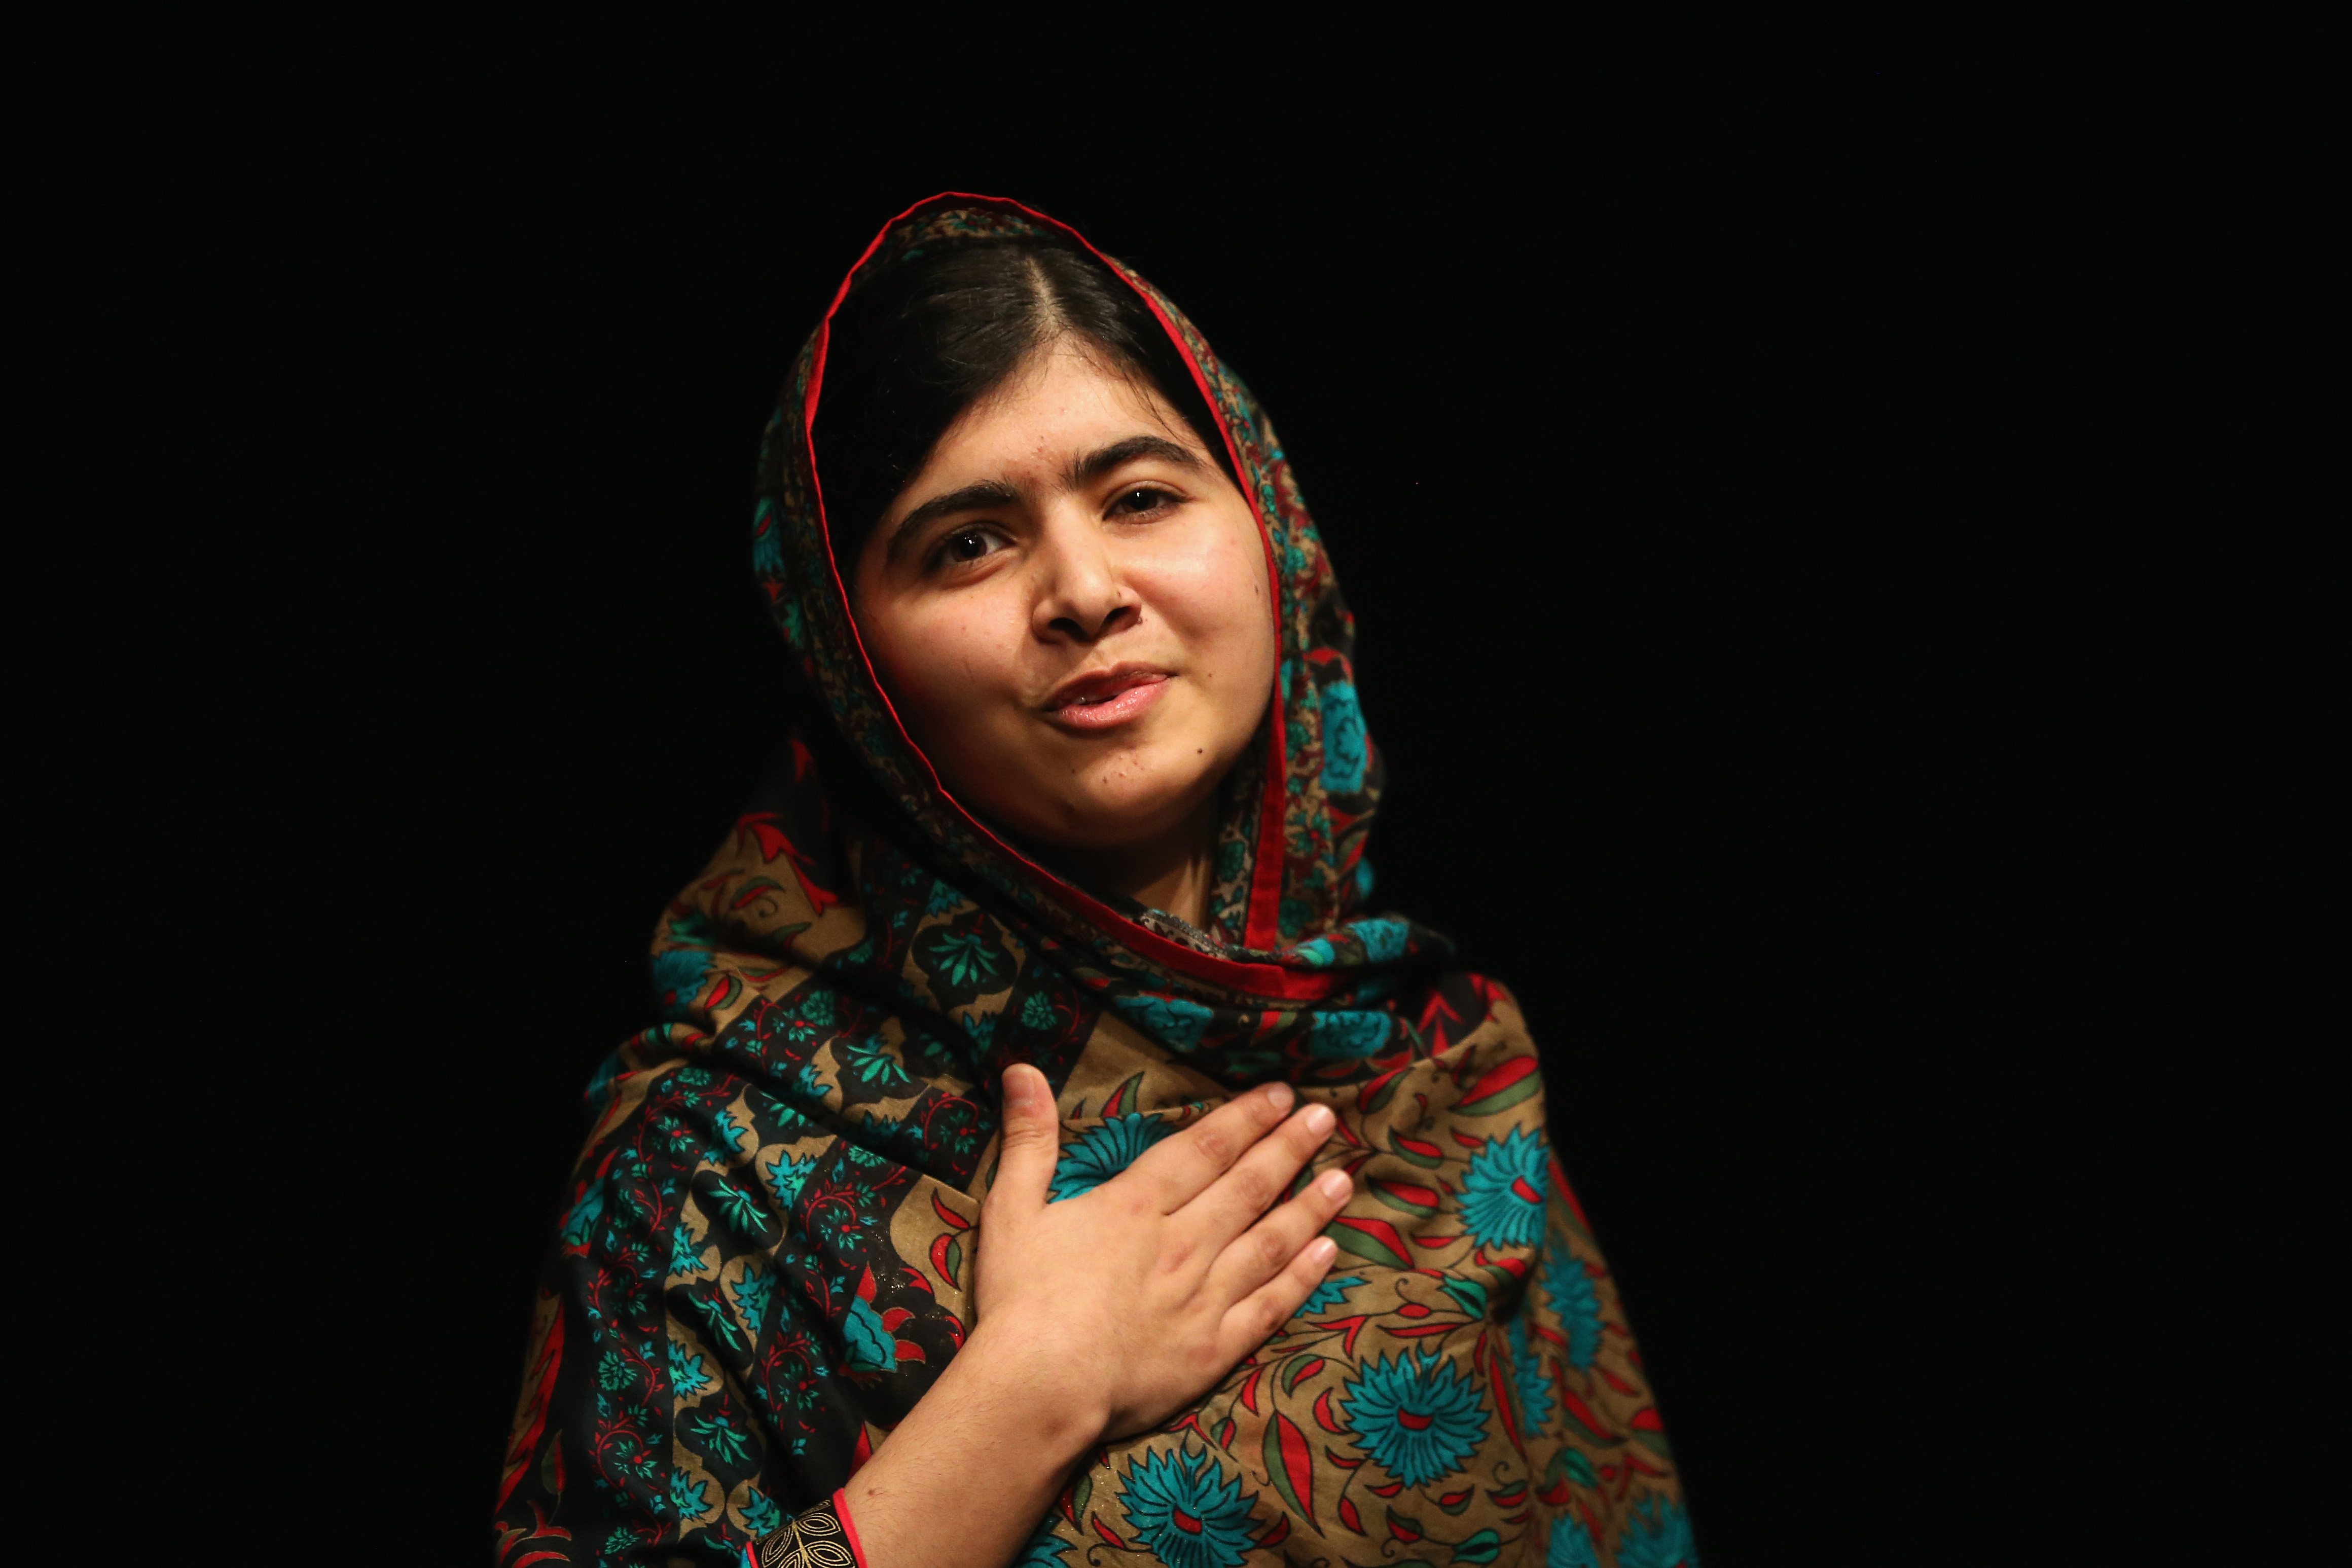 Malala Yousafzai acknowledges the crowd at a press conference at the Library of Birmingham after being announced as a recipient of the Nobel Peace Prize on Friday. (Christopher Furlong—Getty Images)